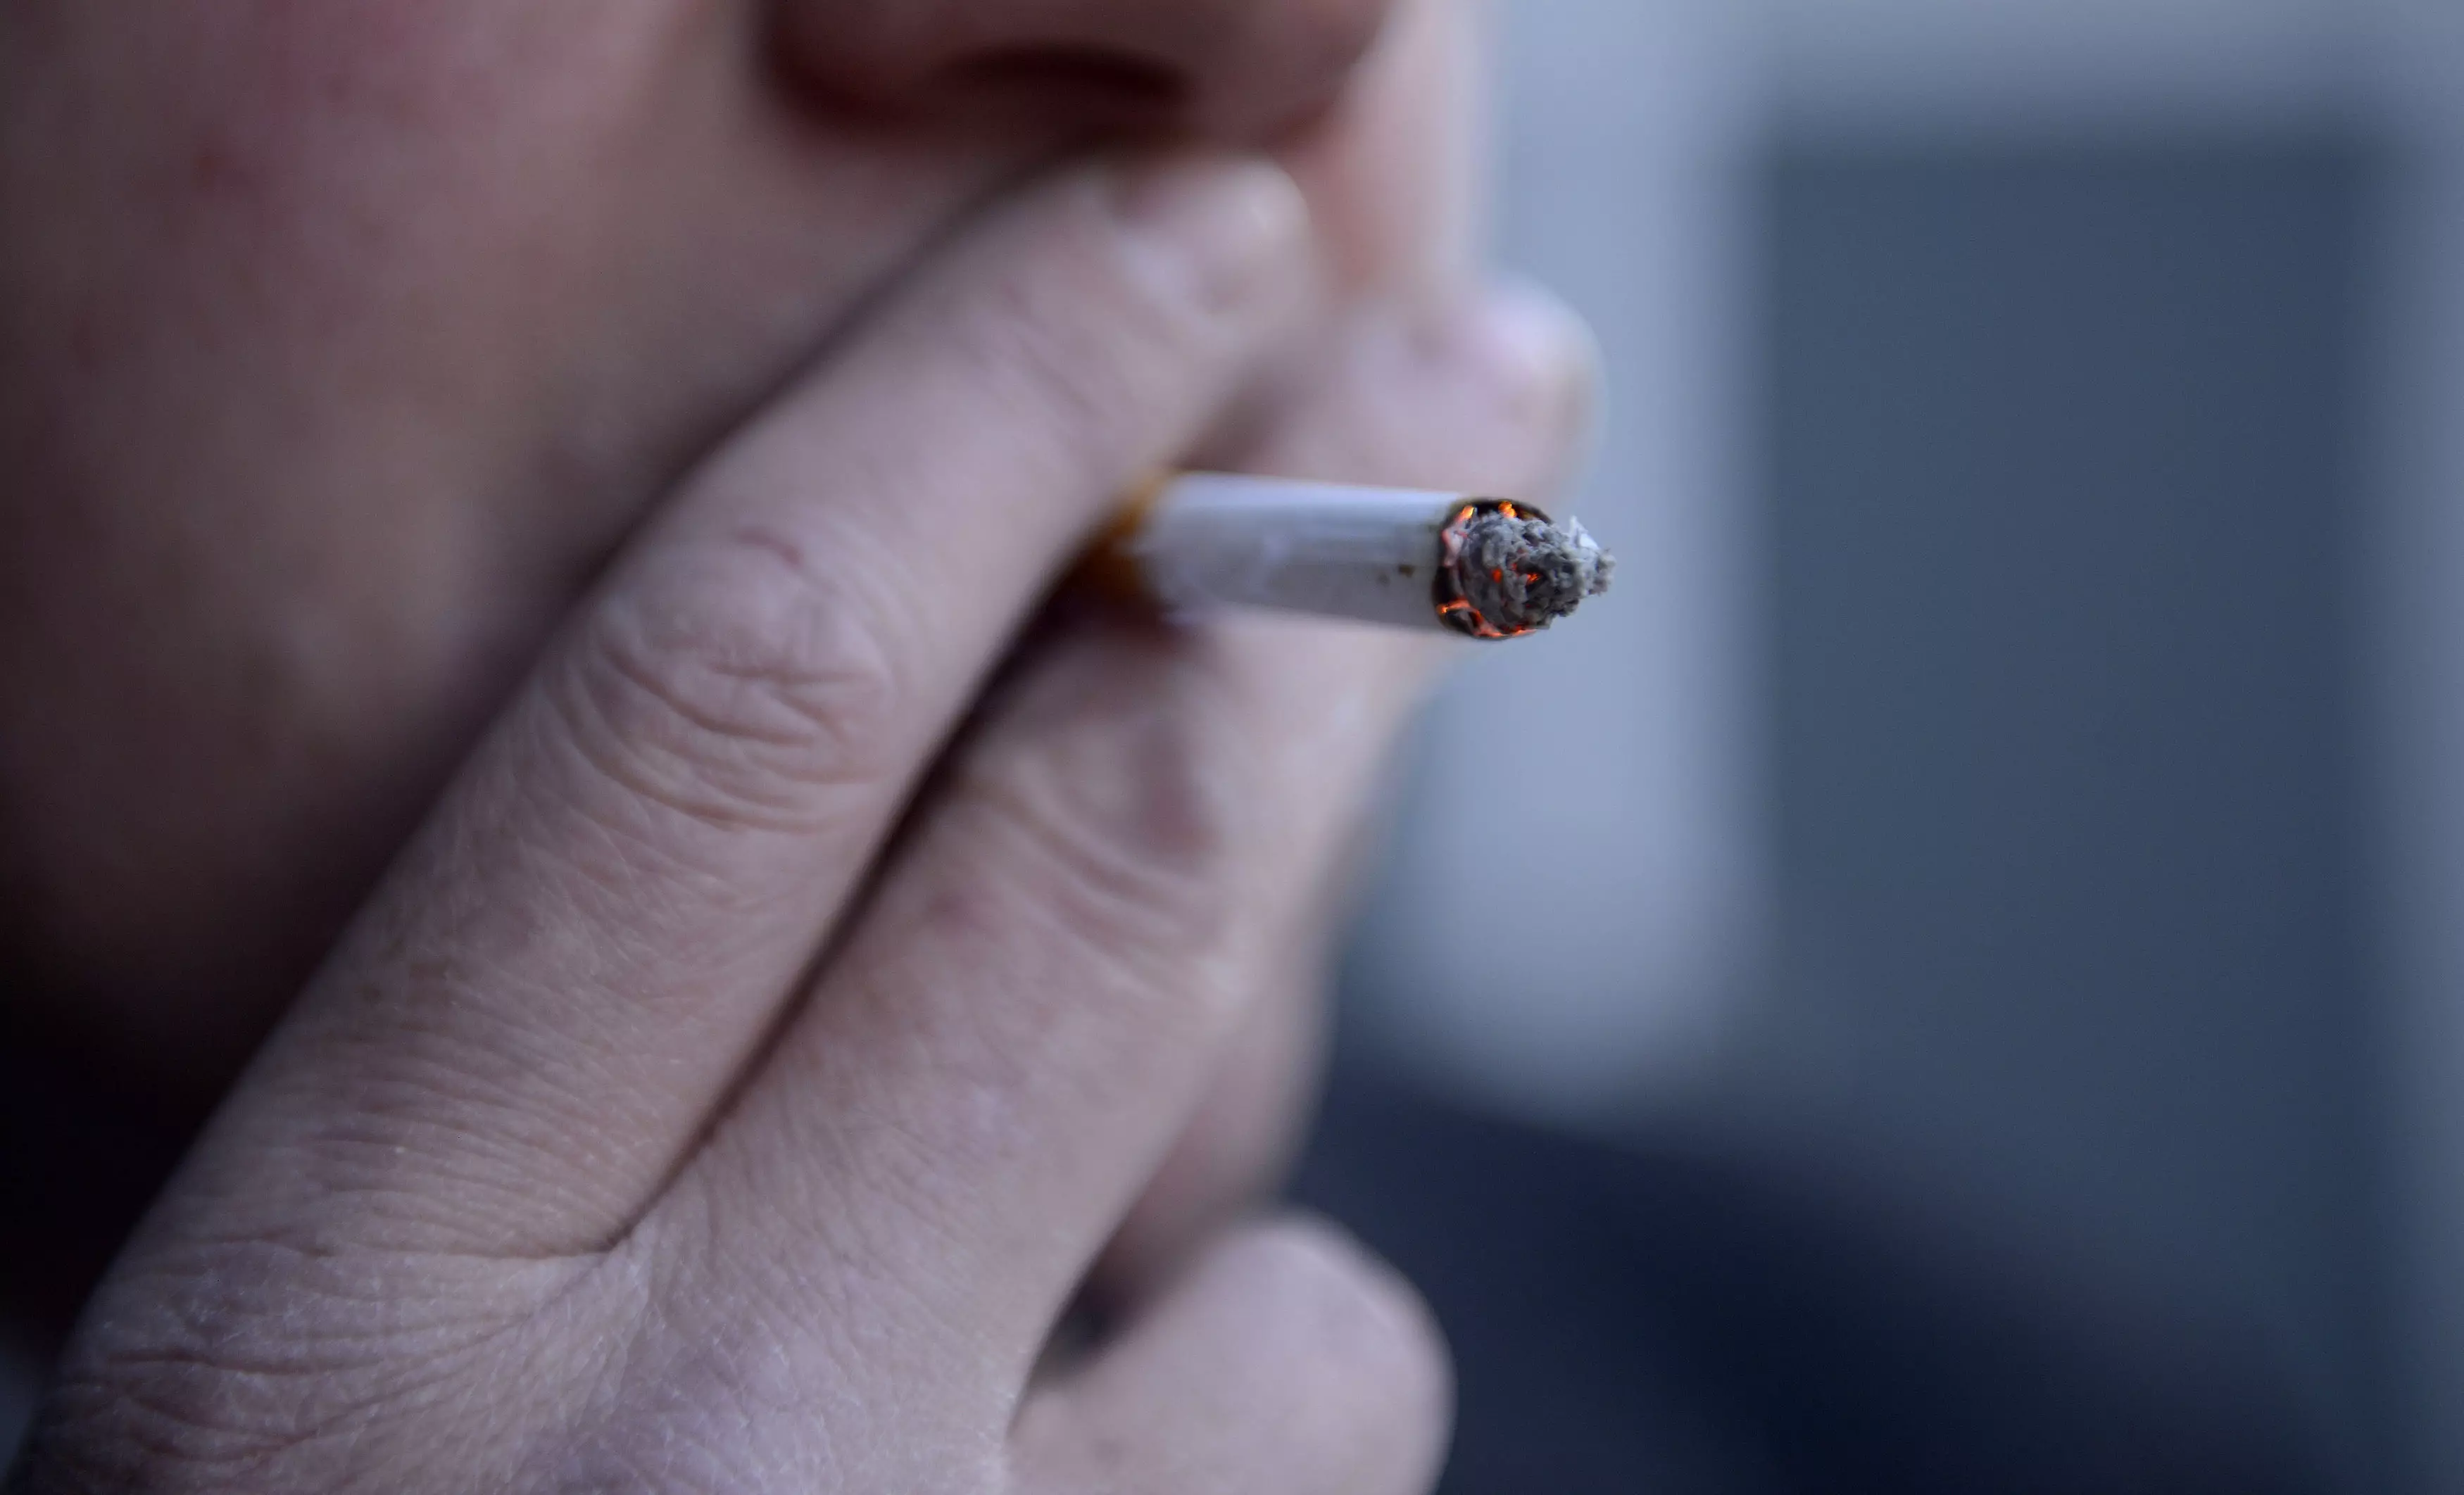 Scientists say smoking contain toxins which can affect the cells in the penis.